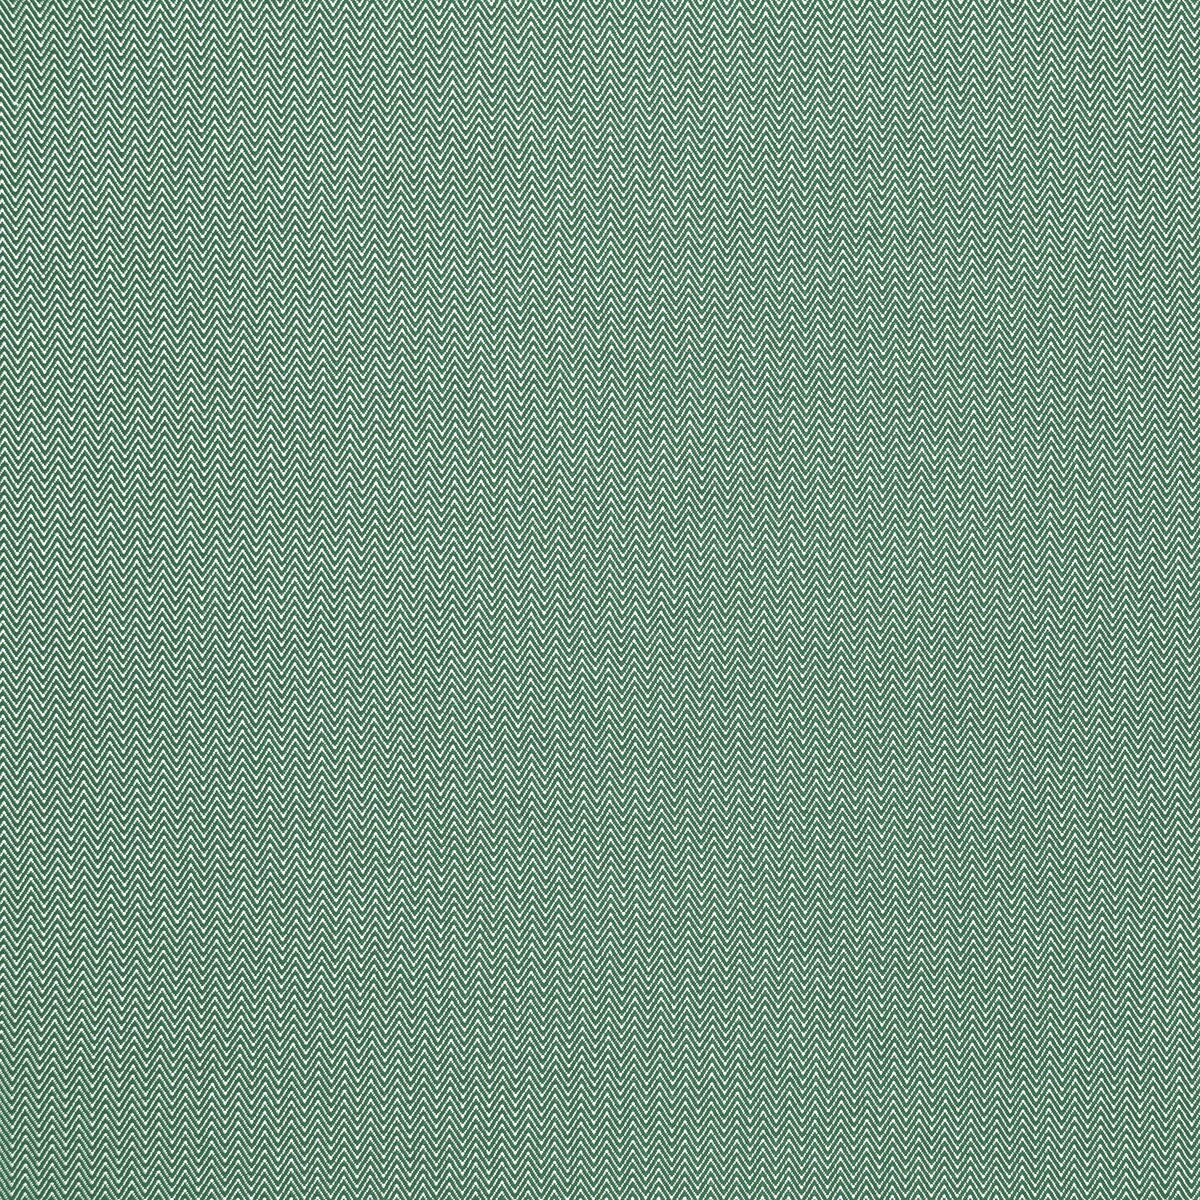 Donald fabric in verde color - pattern GDT5384.8.0 - by Gaston y Daniela in the Gaston Africalia collection